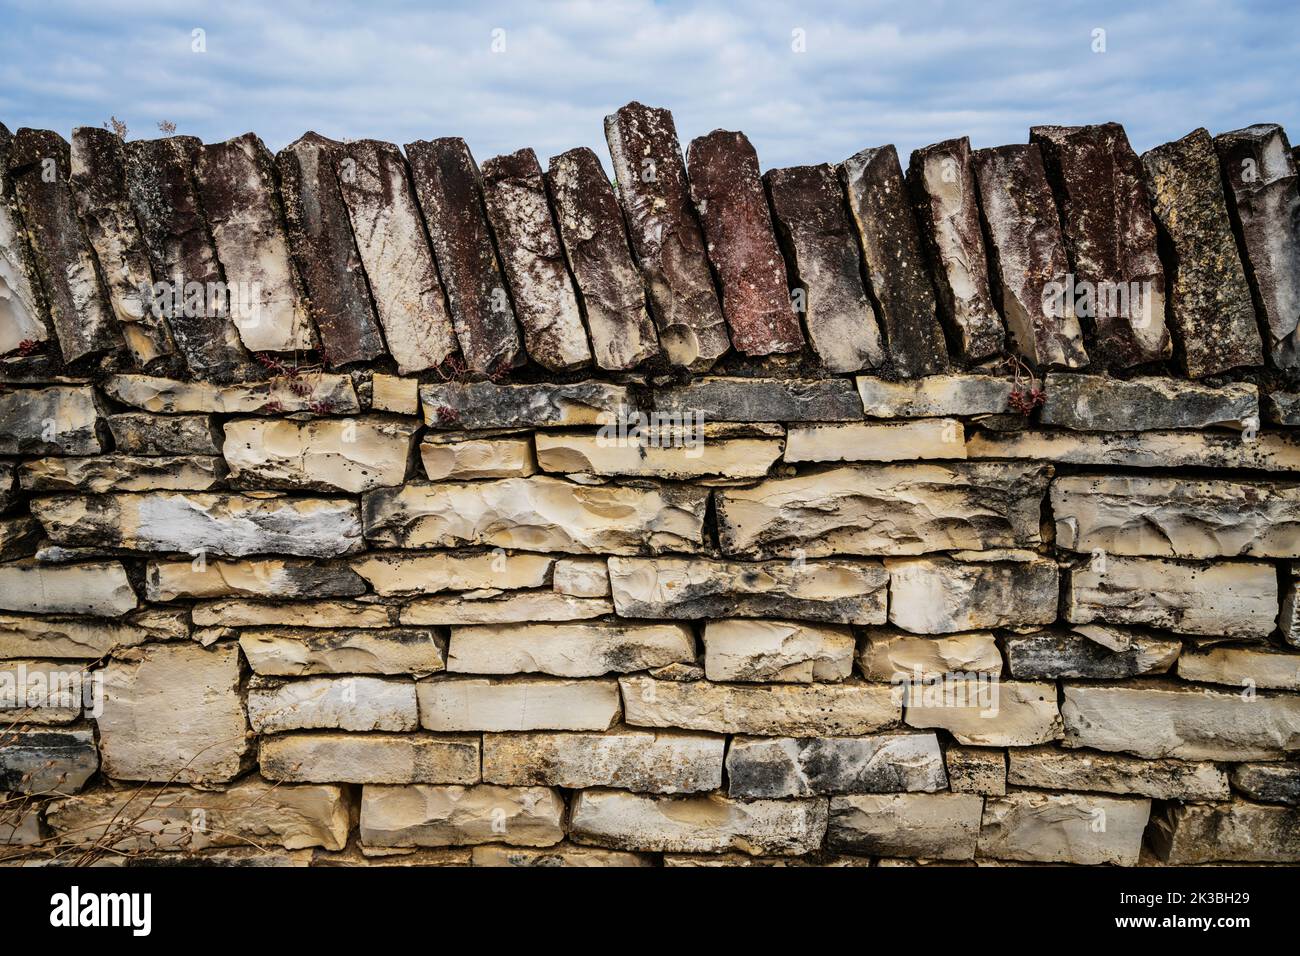 Dry stone walling that encloses some of the vineyards in the Beaune area, Burgundy, France. Stock Photo